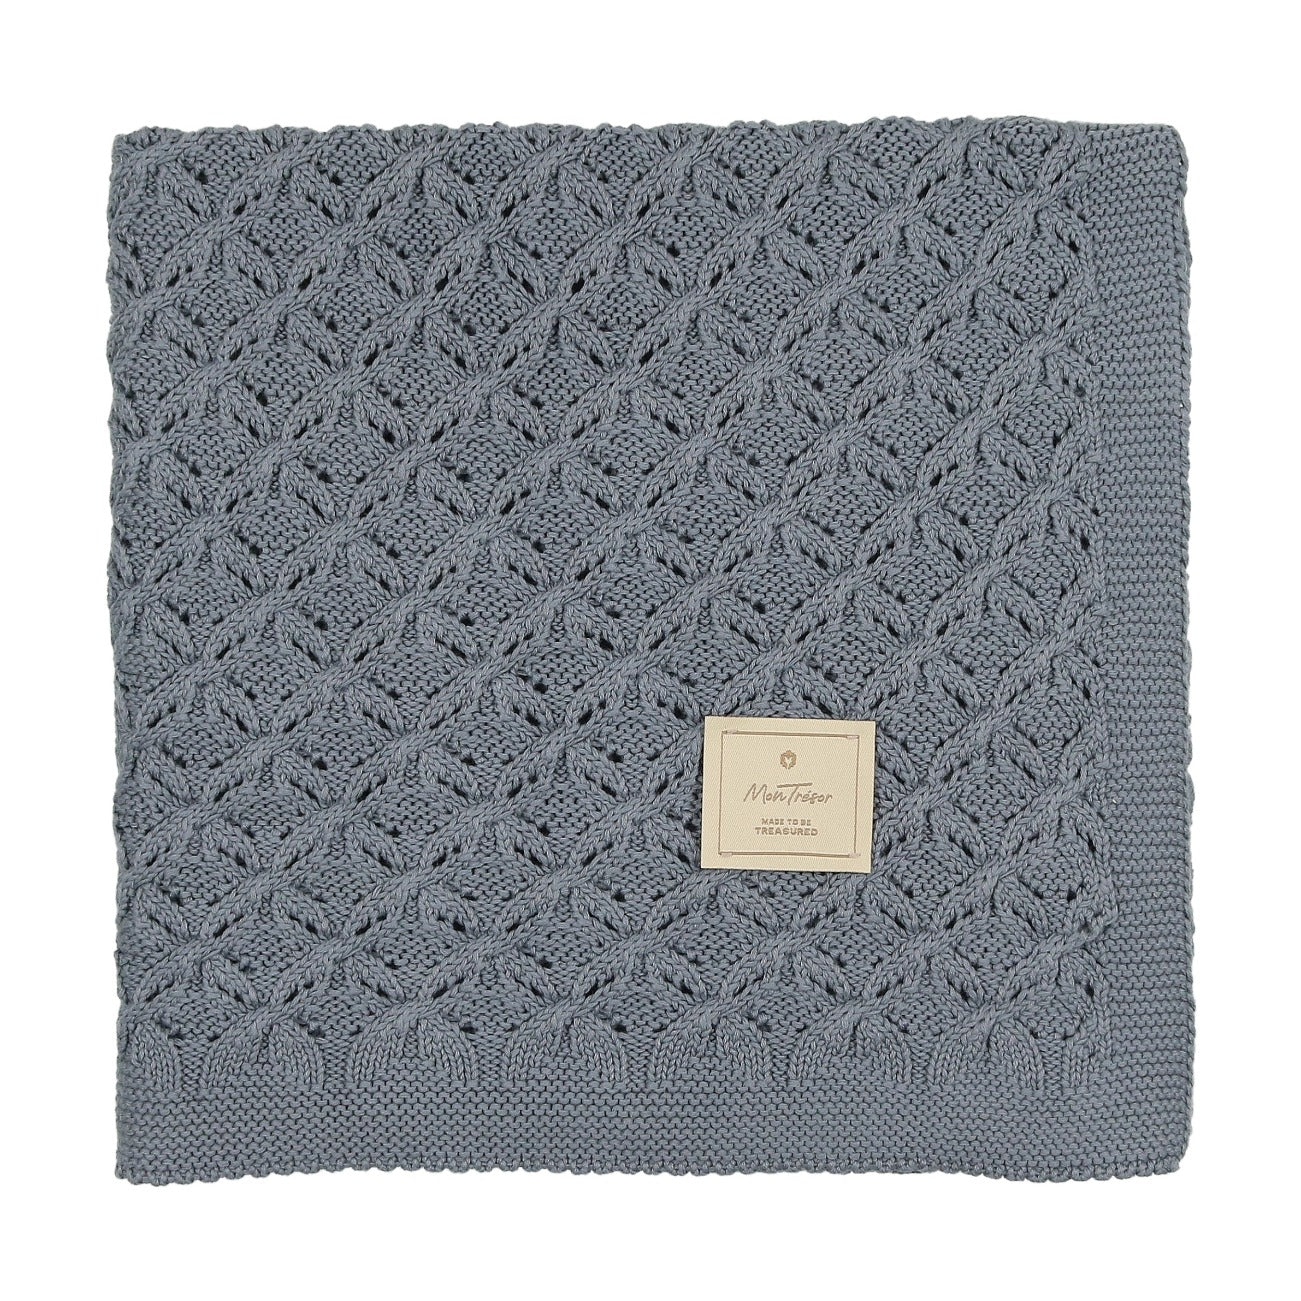 Extra Luxe Knit Blanket